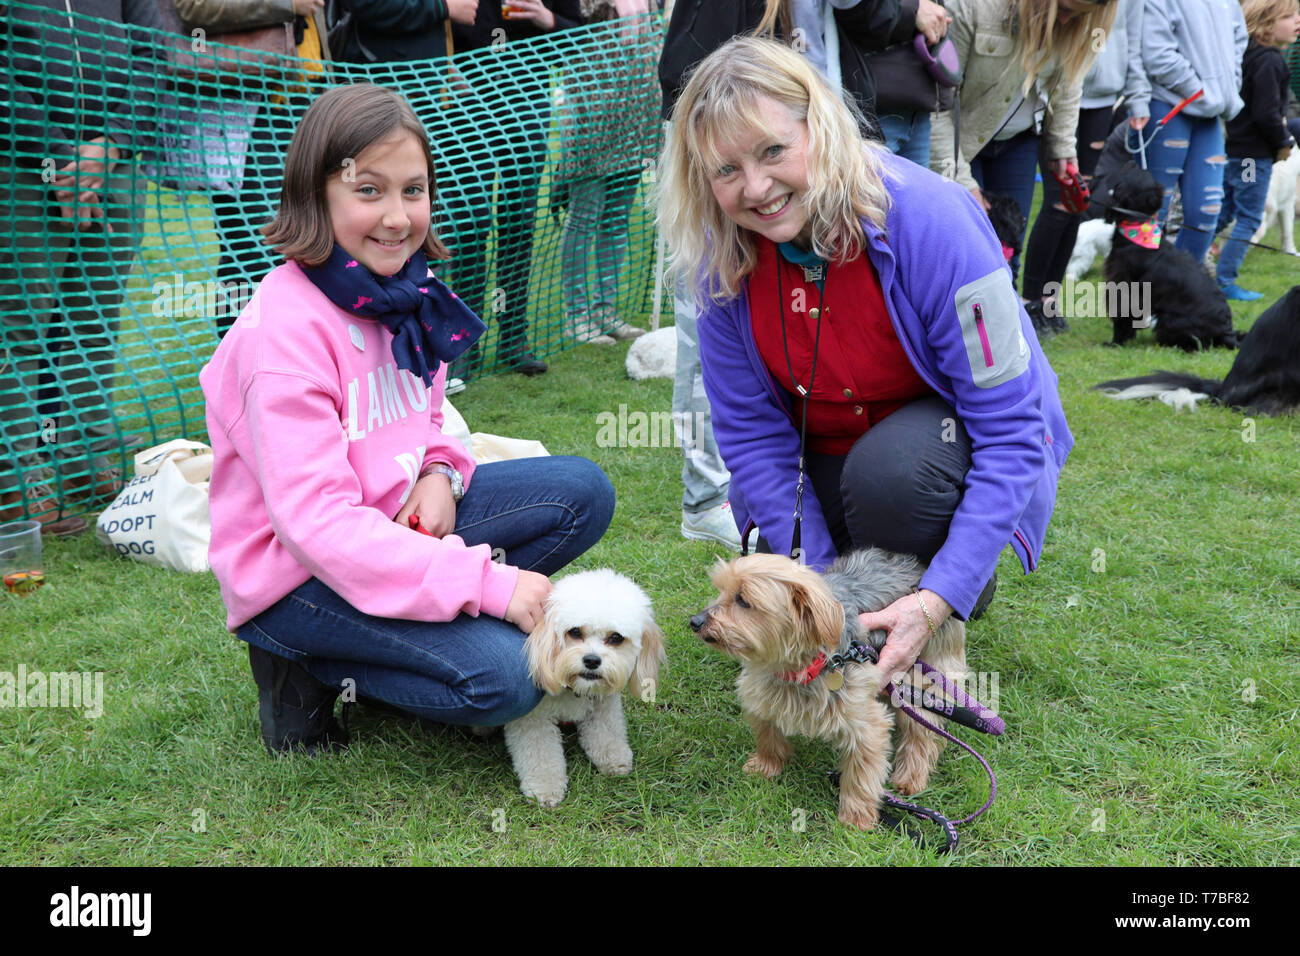 London, UK. 5th May 2019. Judge Liza Goddard with her Yorkshire Terrier, Violet, with contestant Poppy the Cavashon and owner Leila at the All Dogs Matter Bark Off charity dog show, Hampstead Heath, London, England. Cute dogs took part in several categories of this annual dog show which is run by the charity which houses and rehomes dogs in London and finds homes for dogs from overseas. Dogs competed to be cutest pup, best rescue and more. More information at www.alldogsmatter.co.uk Credit: Paul Brown/Alamy Live News Stock Photo